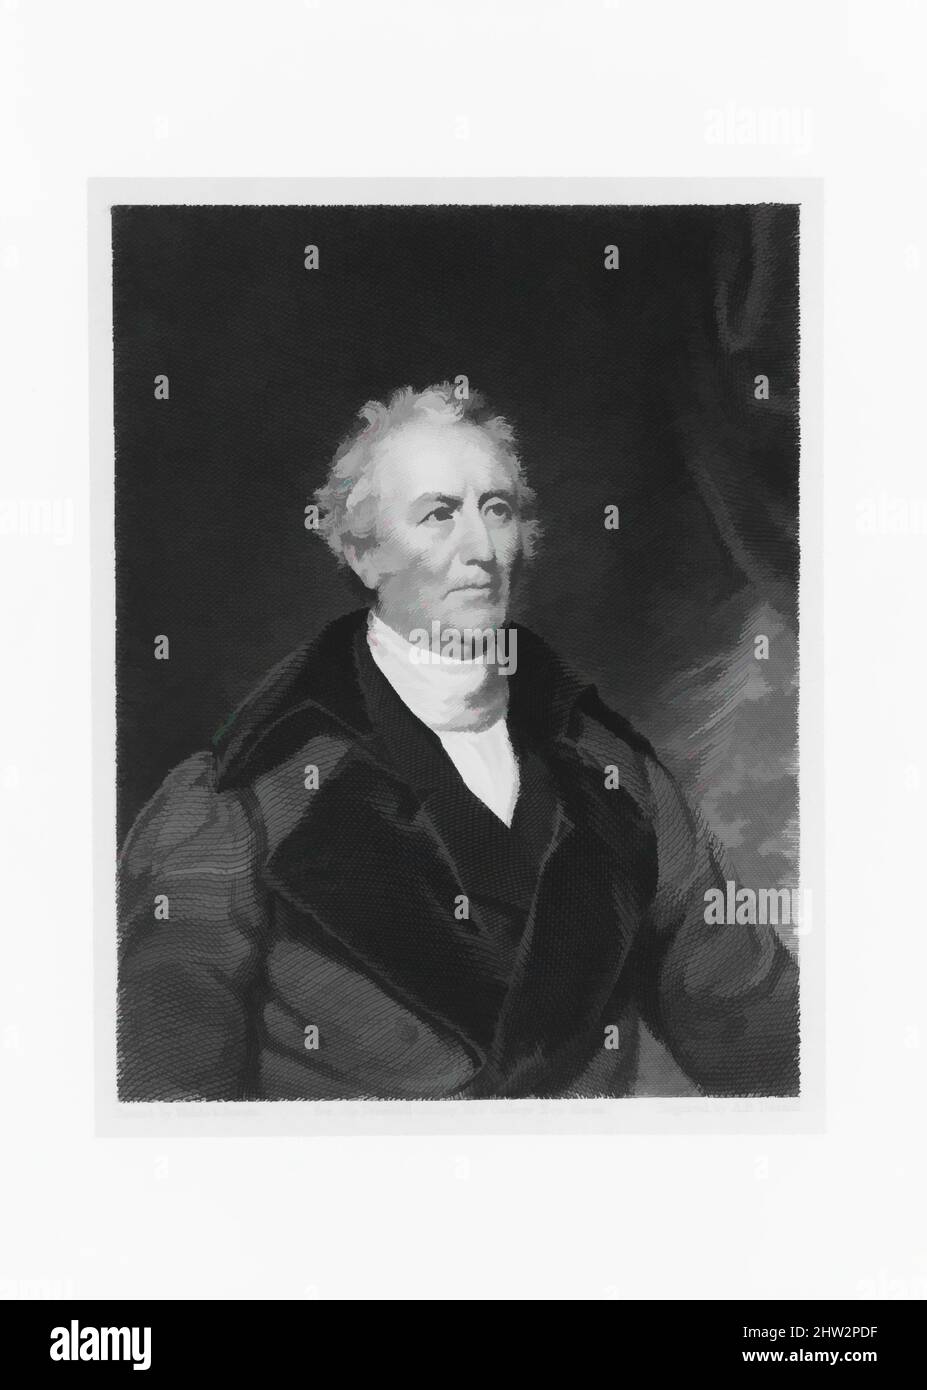 Art inspired by John Trumbull, 1833, Engraving on paper, 5 3/4 x 4 5/8 in. (14.6 x 11.7 cm), Prints, Asher Brown Durand (American, Jefferson, New Jersey 1796–1886 Maplewood, New Jersey, Classic works modernized by Artotop with a splash of modernity. Shapes, color and value, eye-catching visual impact on art. Emotions through freedom of artworks in a contemporary way. A timeless message pursuing a wildly creative new direction. Artists turning to the digital medium and creating the Artotop NFT Stock Photo